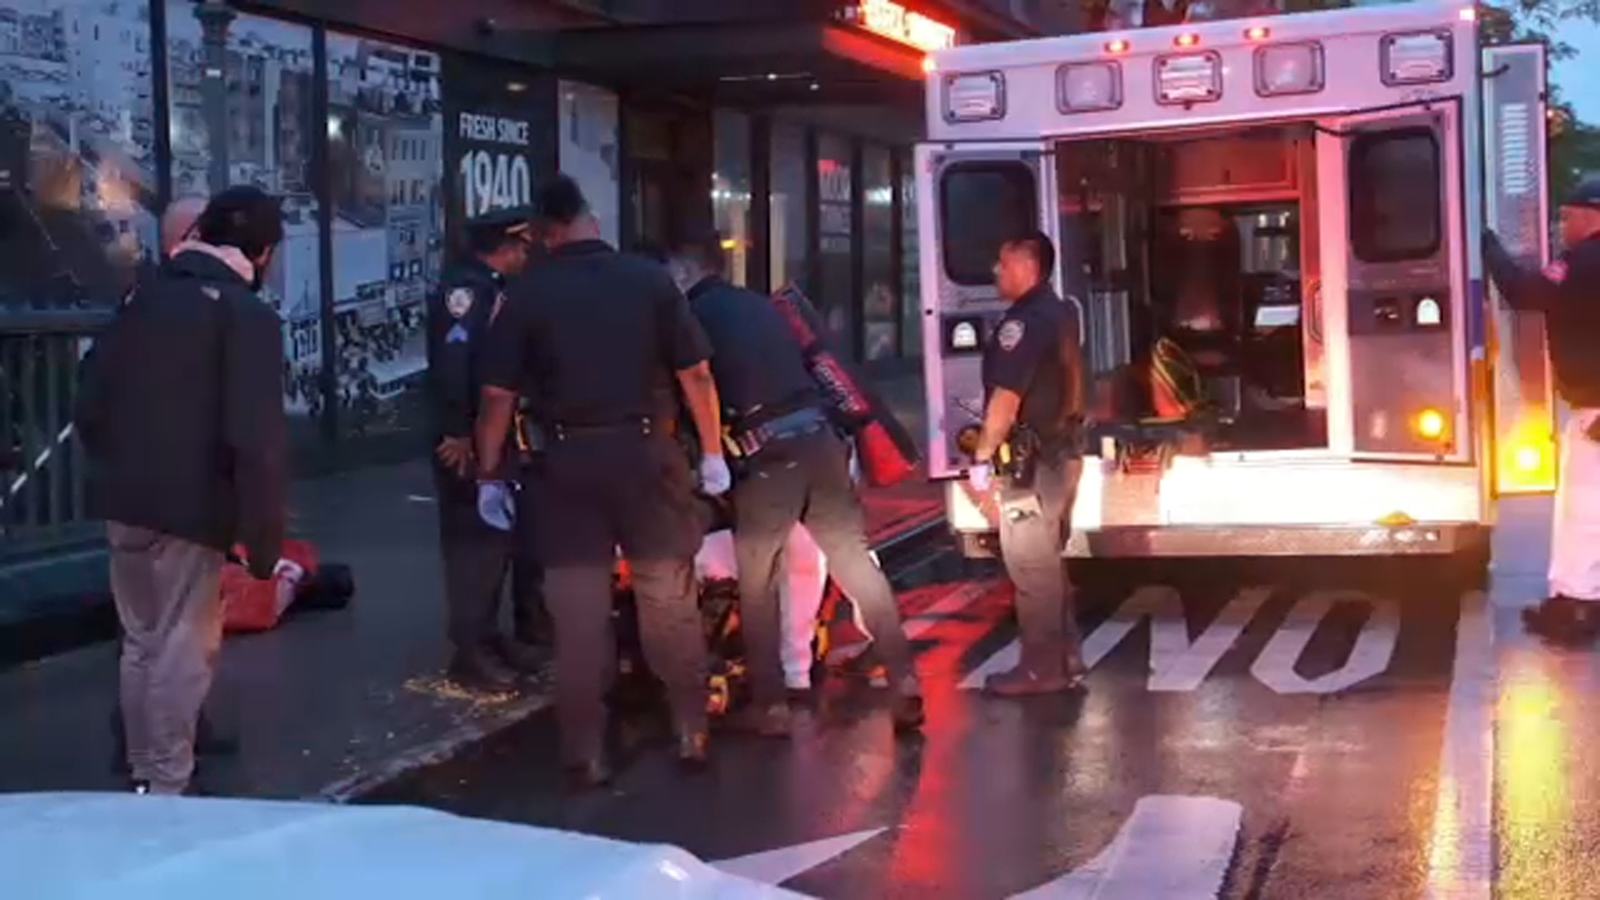 Man stabbed at Lower East Side subway station, police searching for attacker [Video]